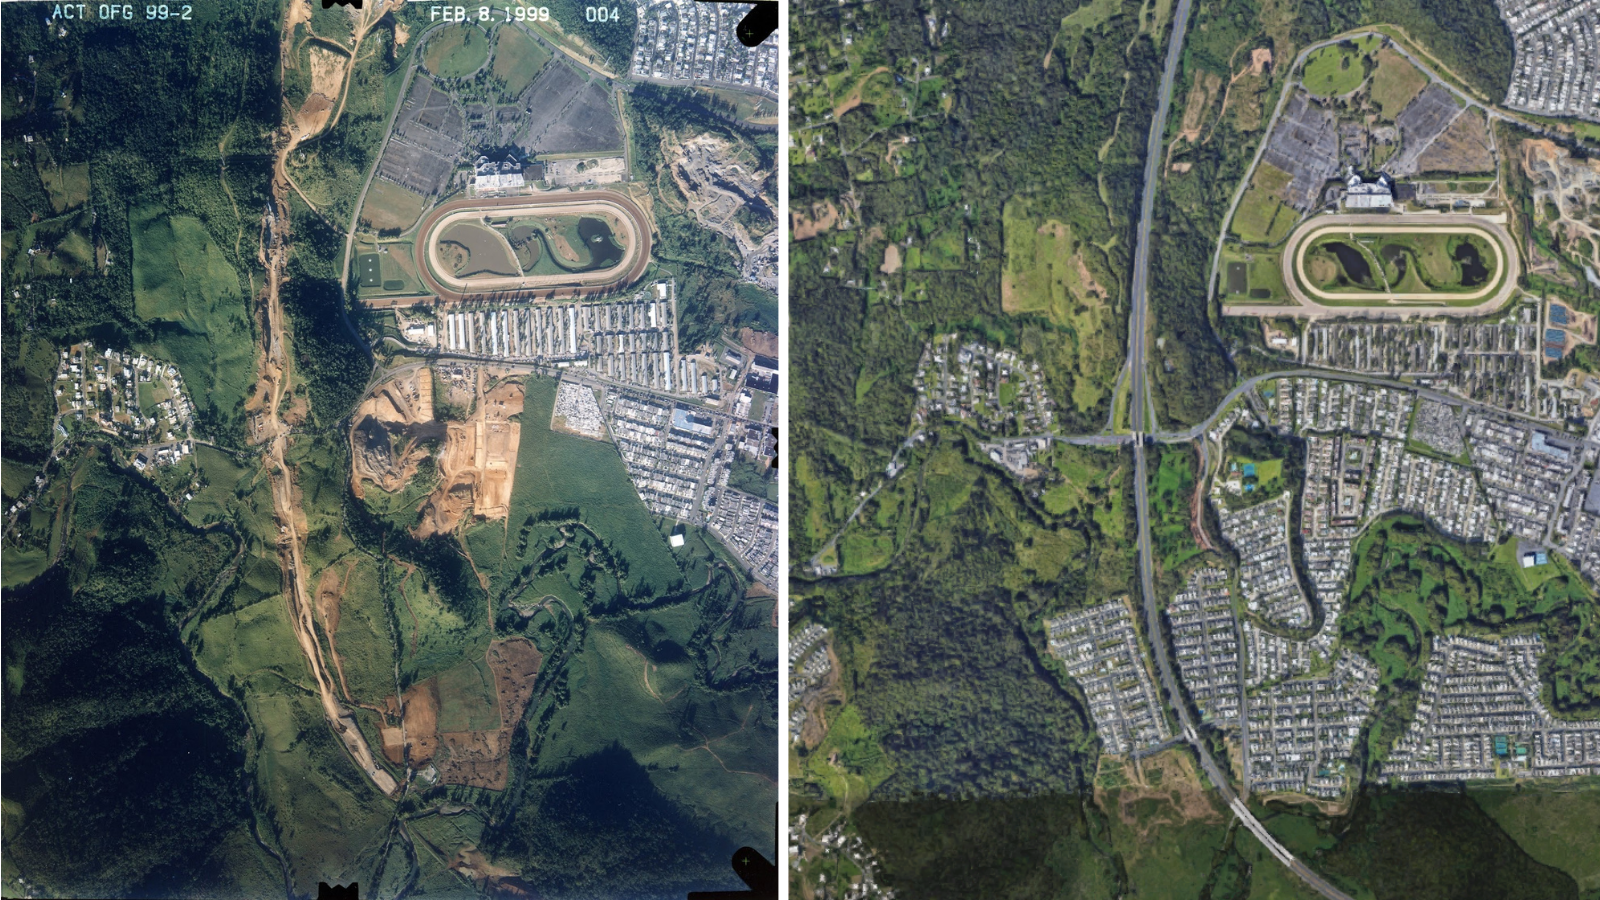 Aerial view of Puerto Rico prior to PR 66 construction with forest and aerial view of PR 66 after construction with forest construction and sprawl